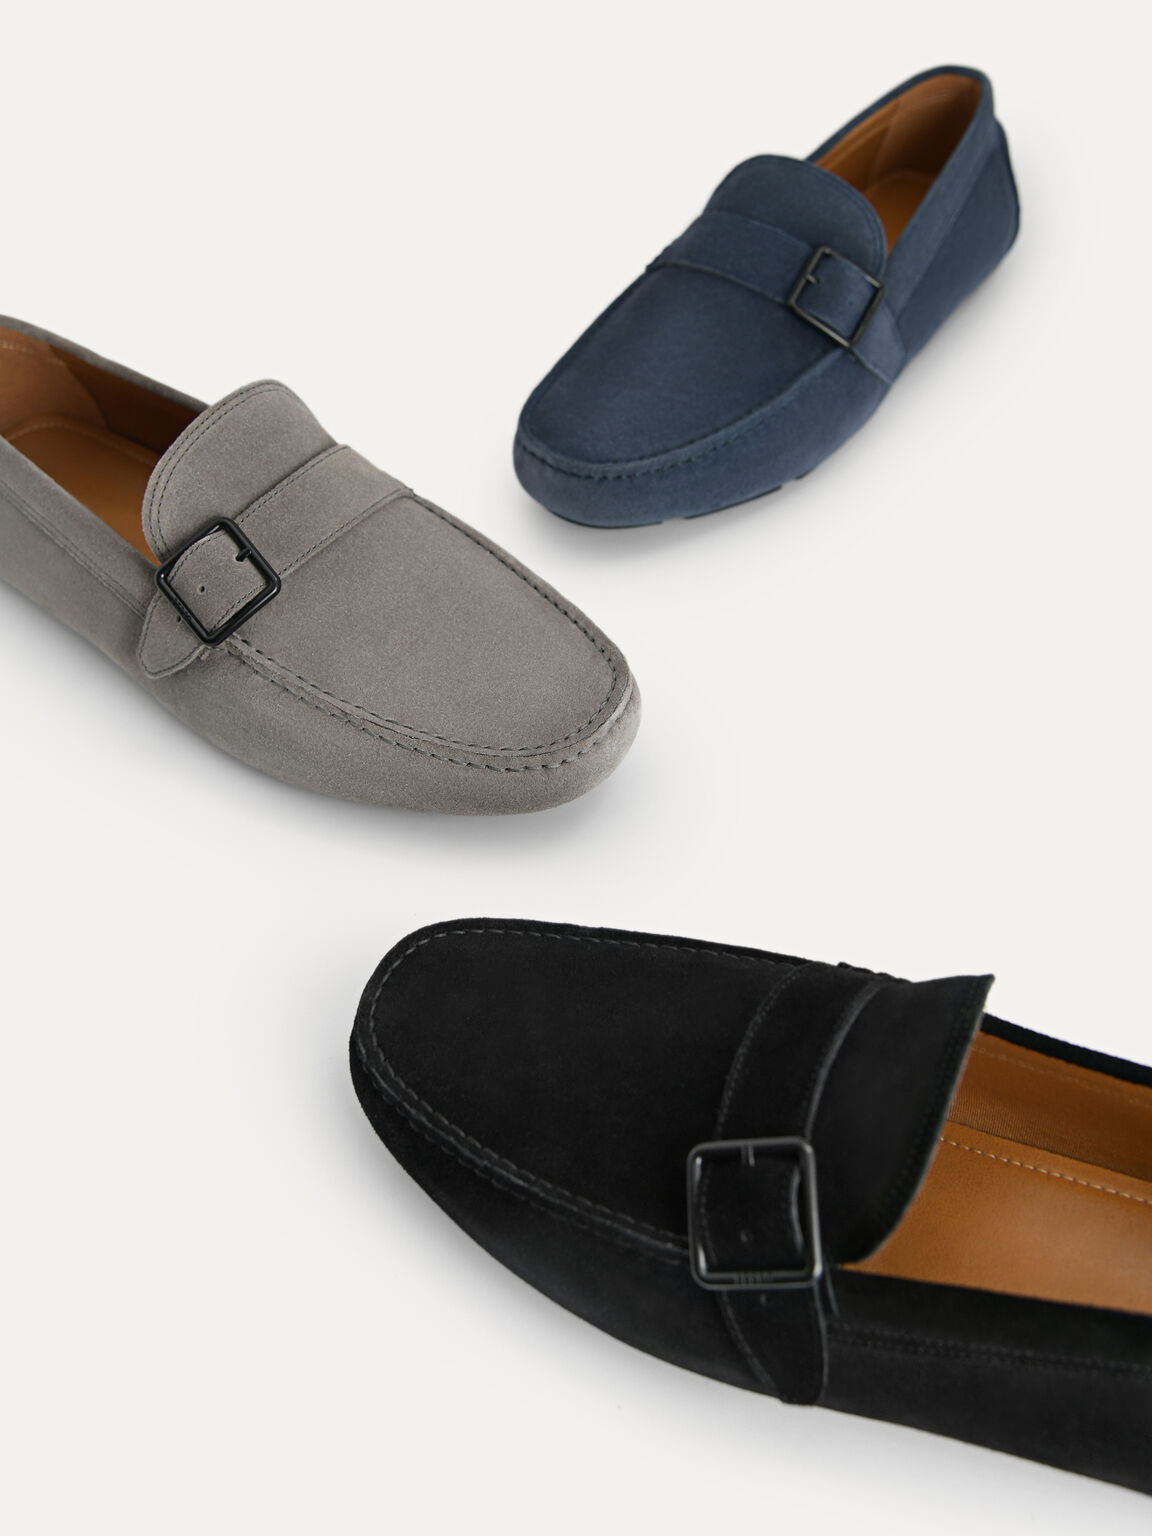 Suede Leather Moccasins with Buckle Detailing, Grey, hi-res